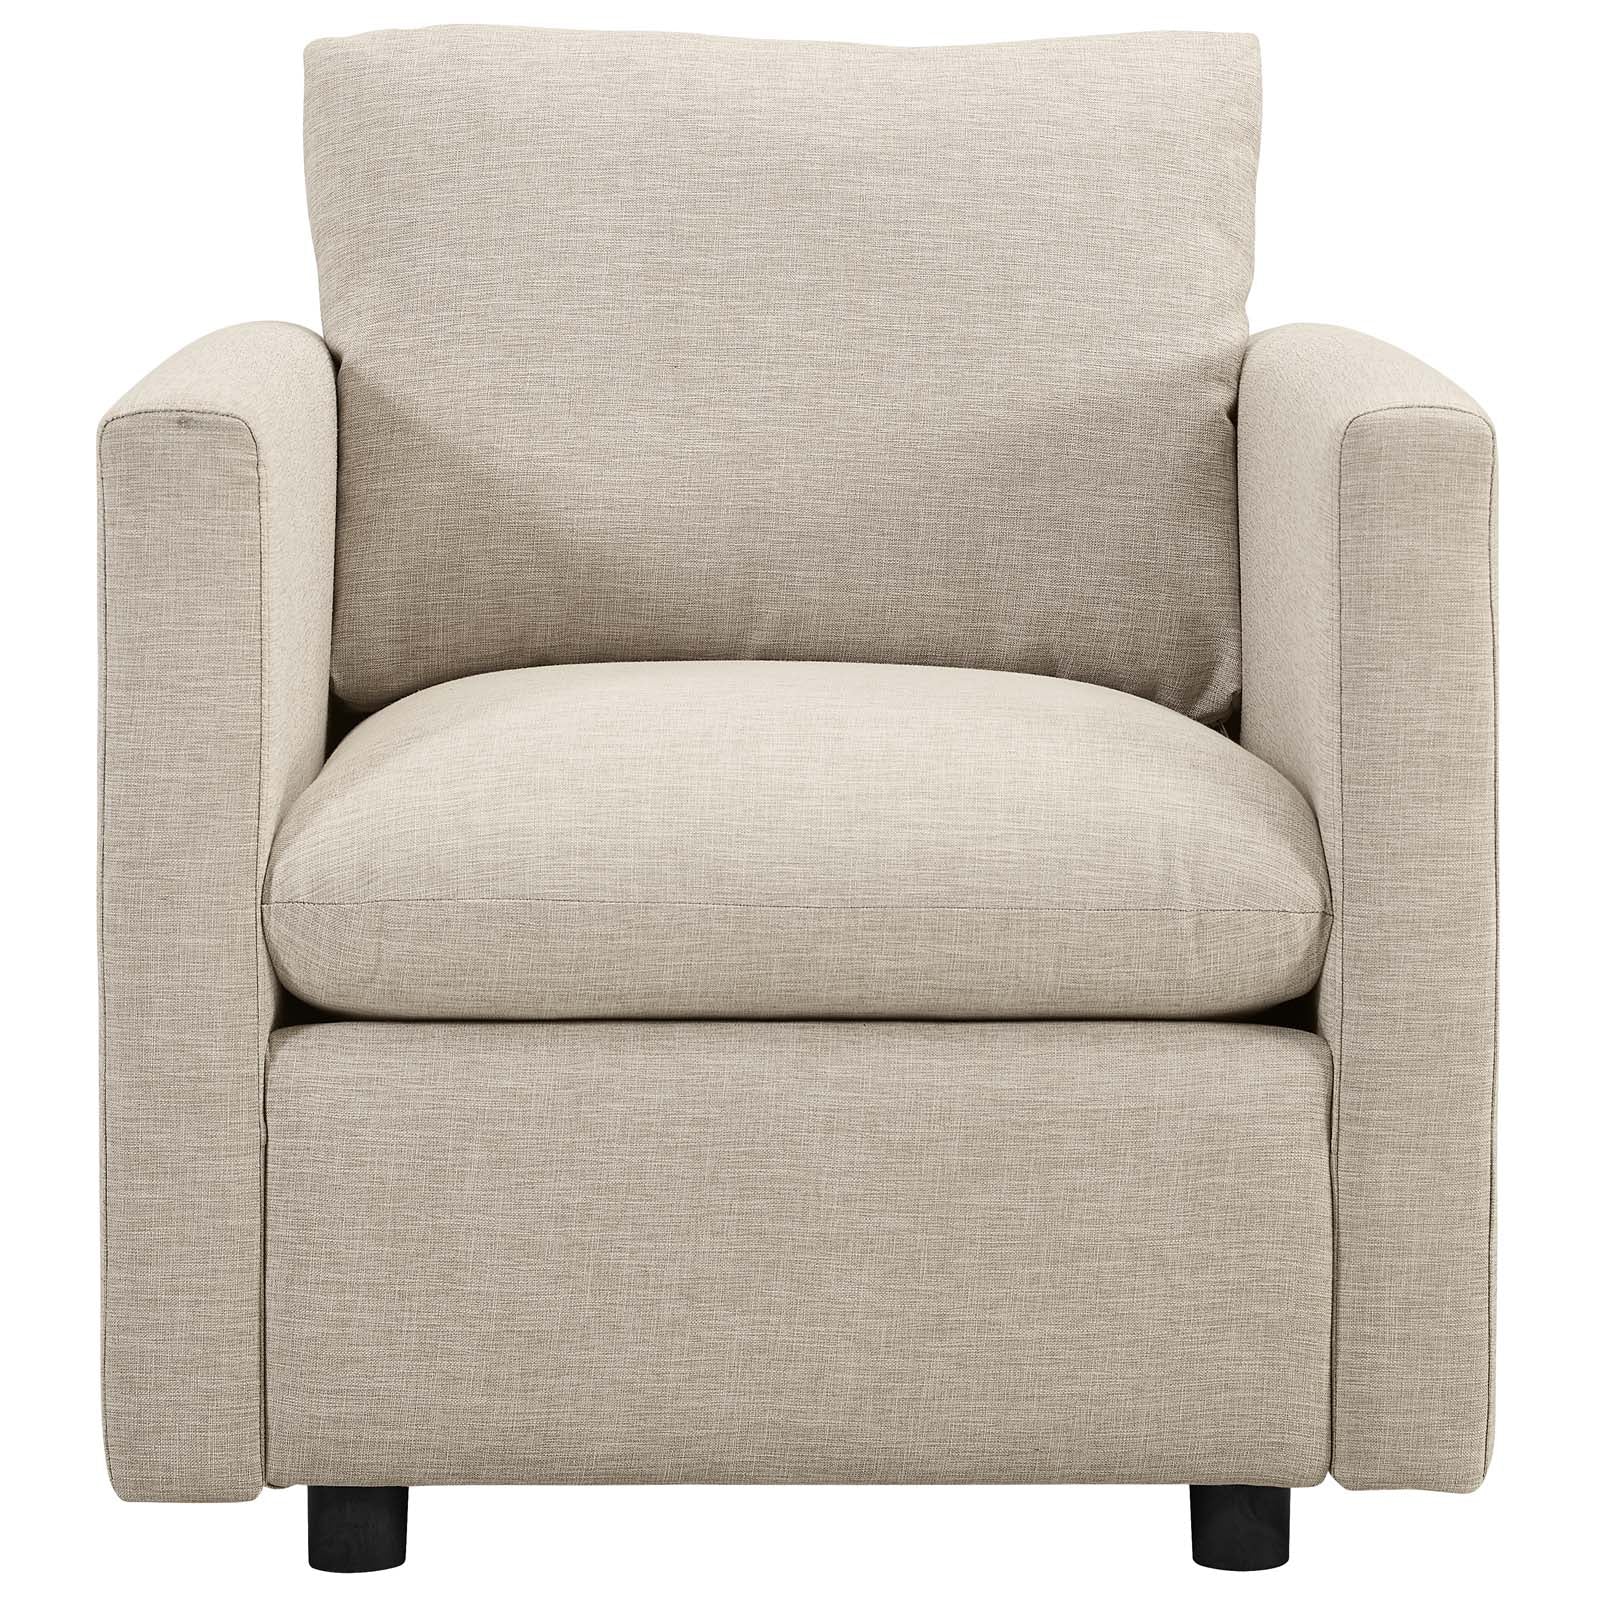 Activate Upholstered Fabric Armchair - Beige